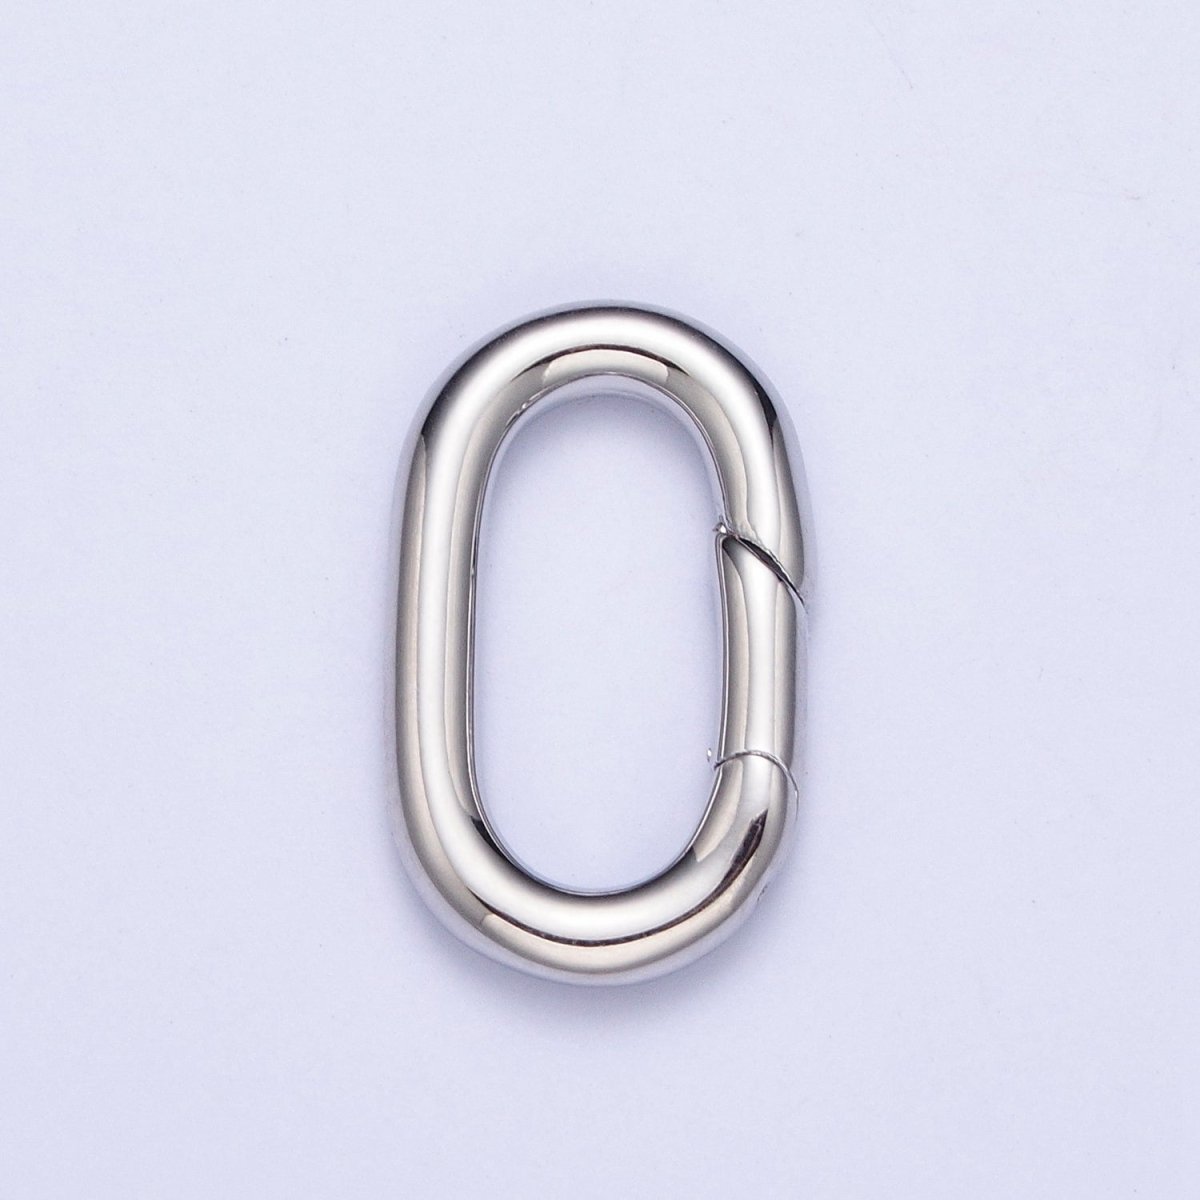 White Gold Filled Long Oval Spring Gate For Jewelry Making Supply Closure Charm Holder L-818 - DLUXCA